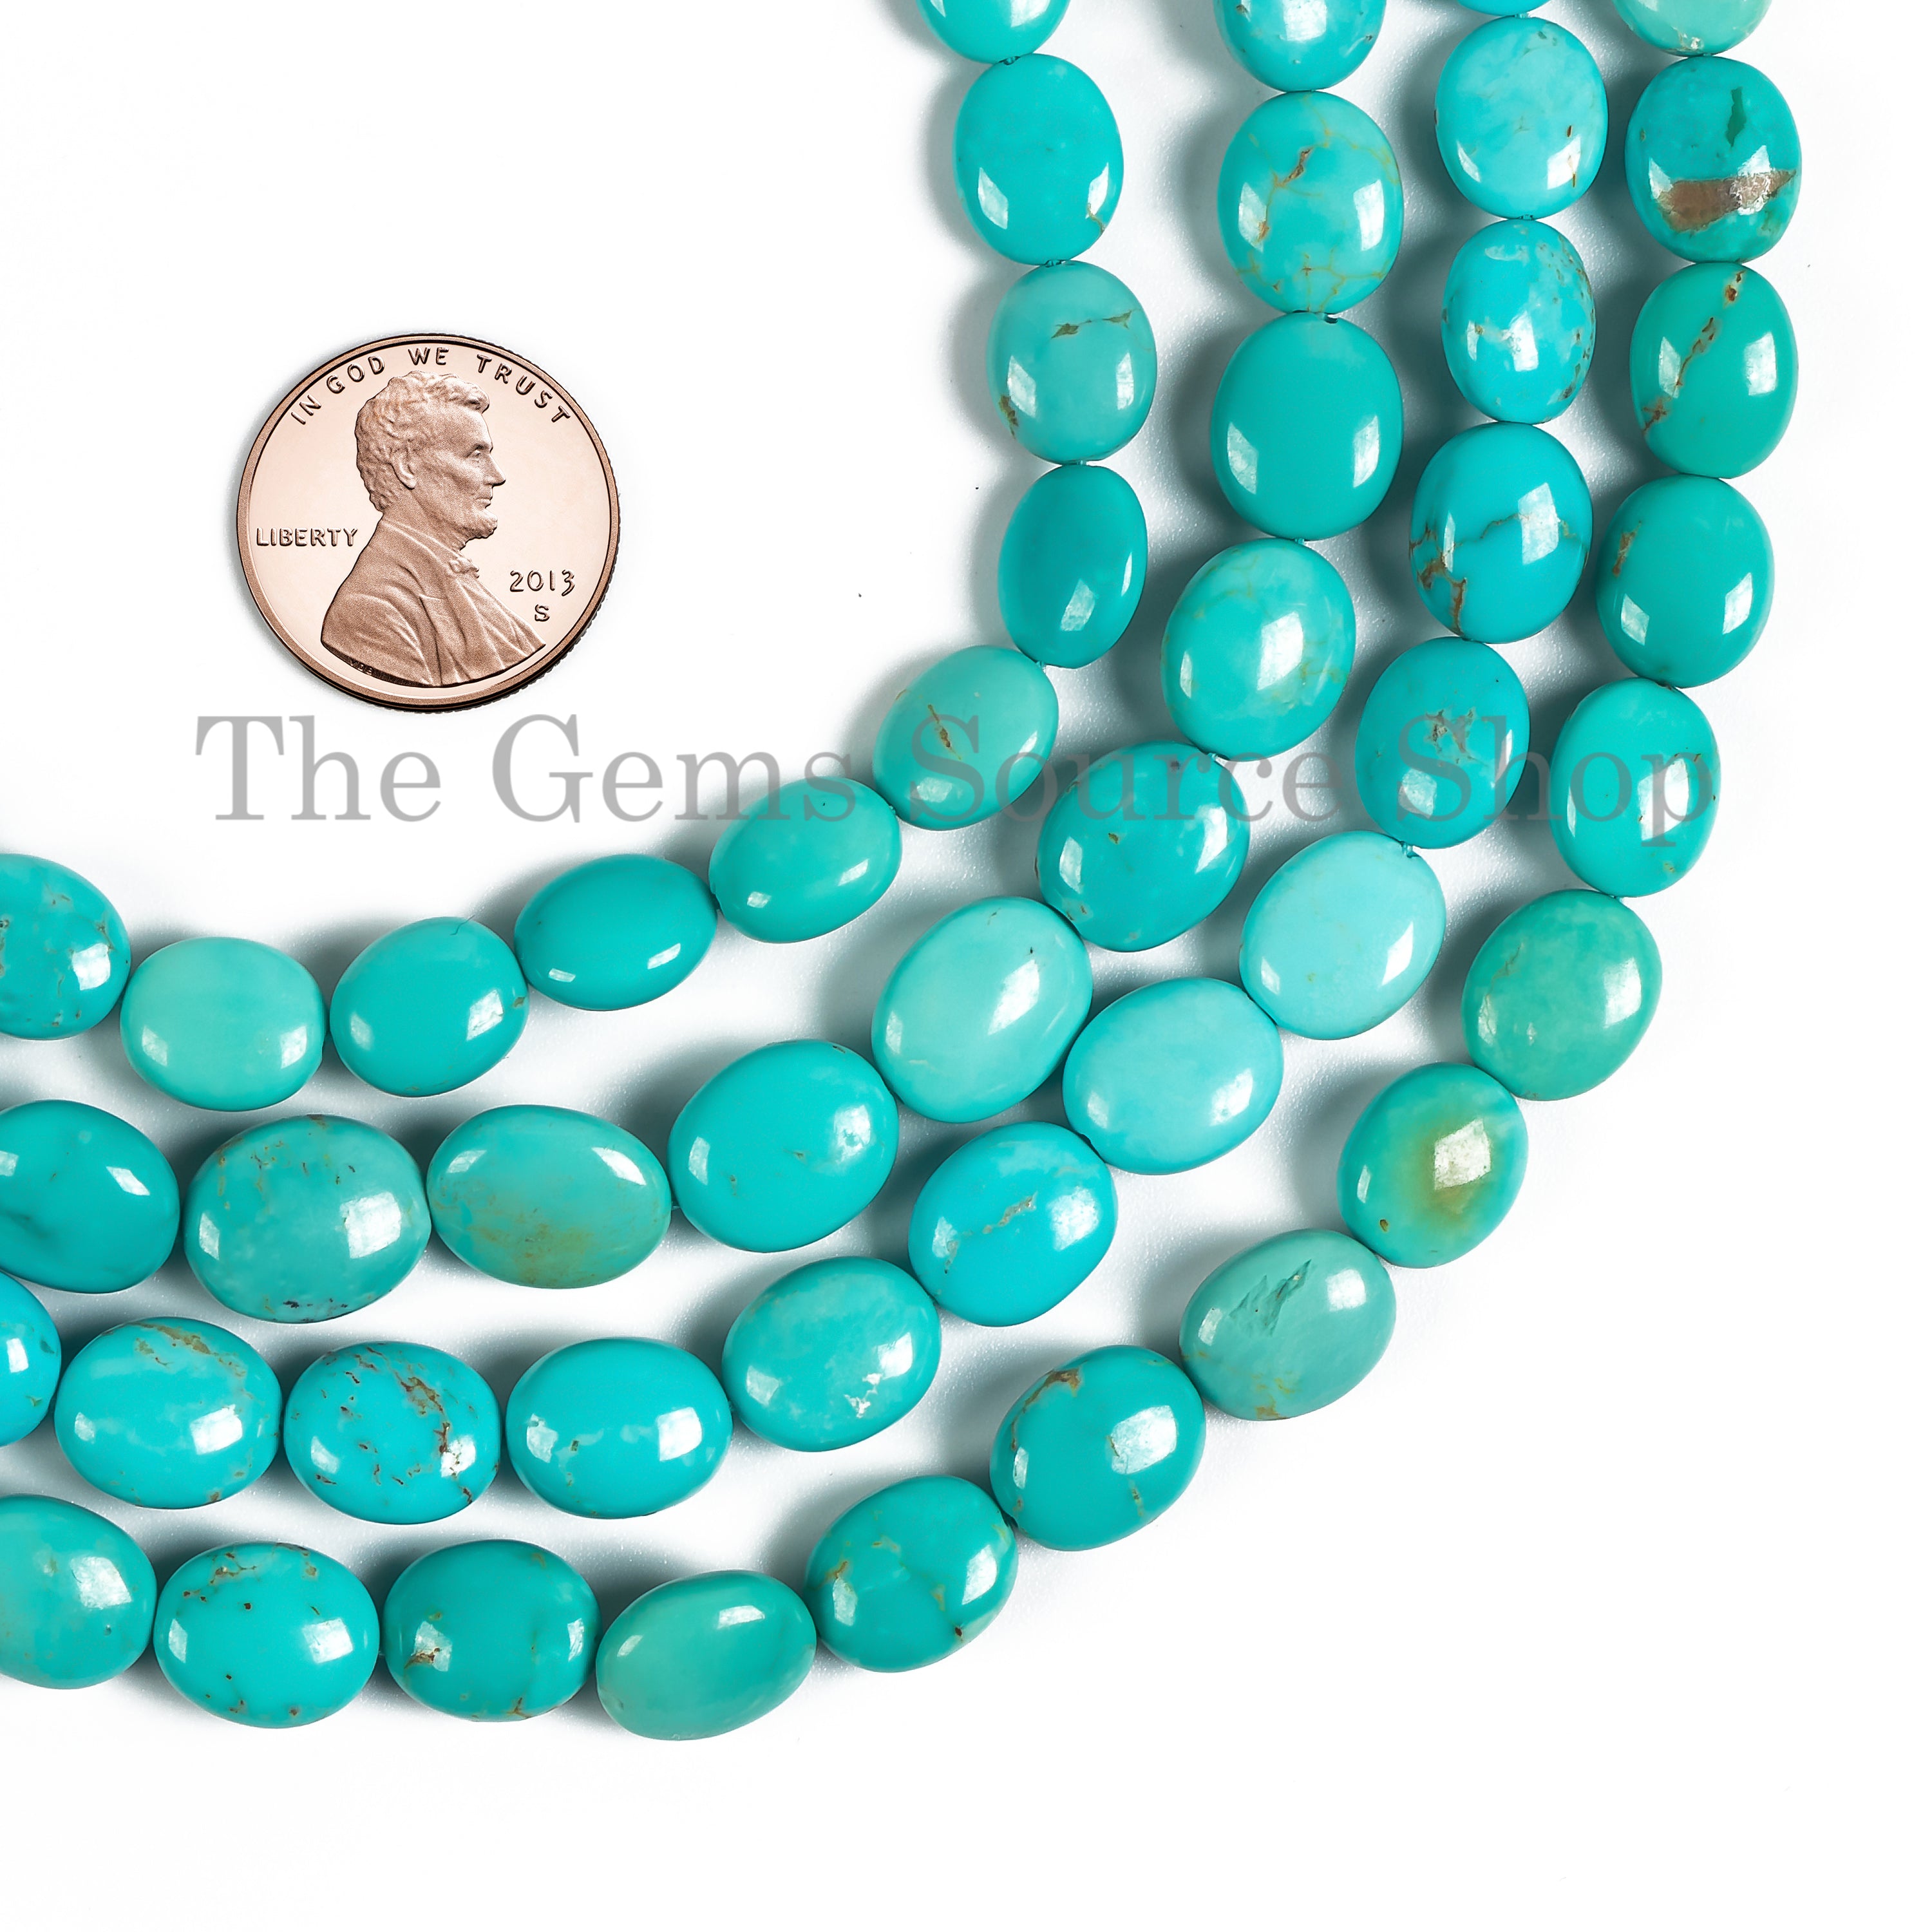 Turquoise Smooth Oval Plain Oval Shape Beads TGS-4536